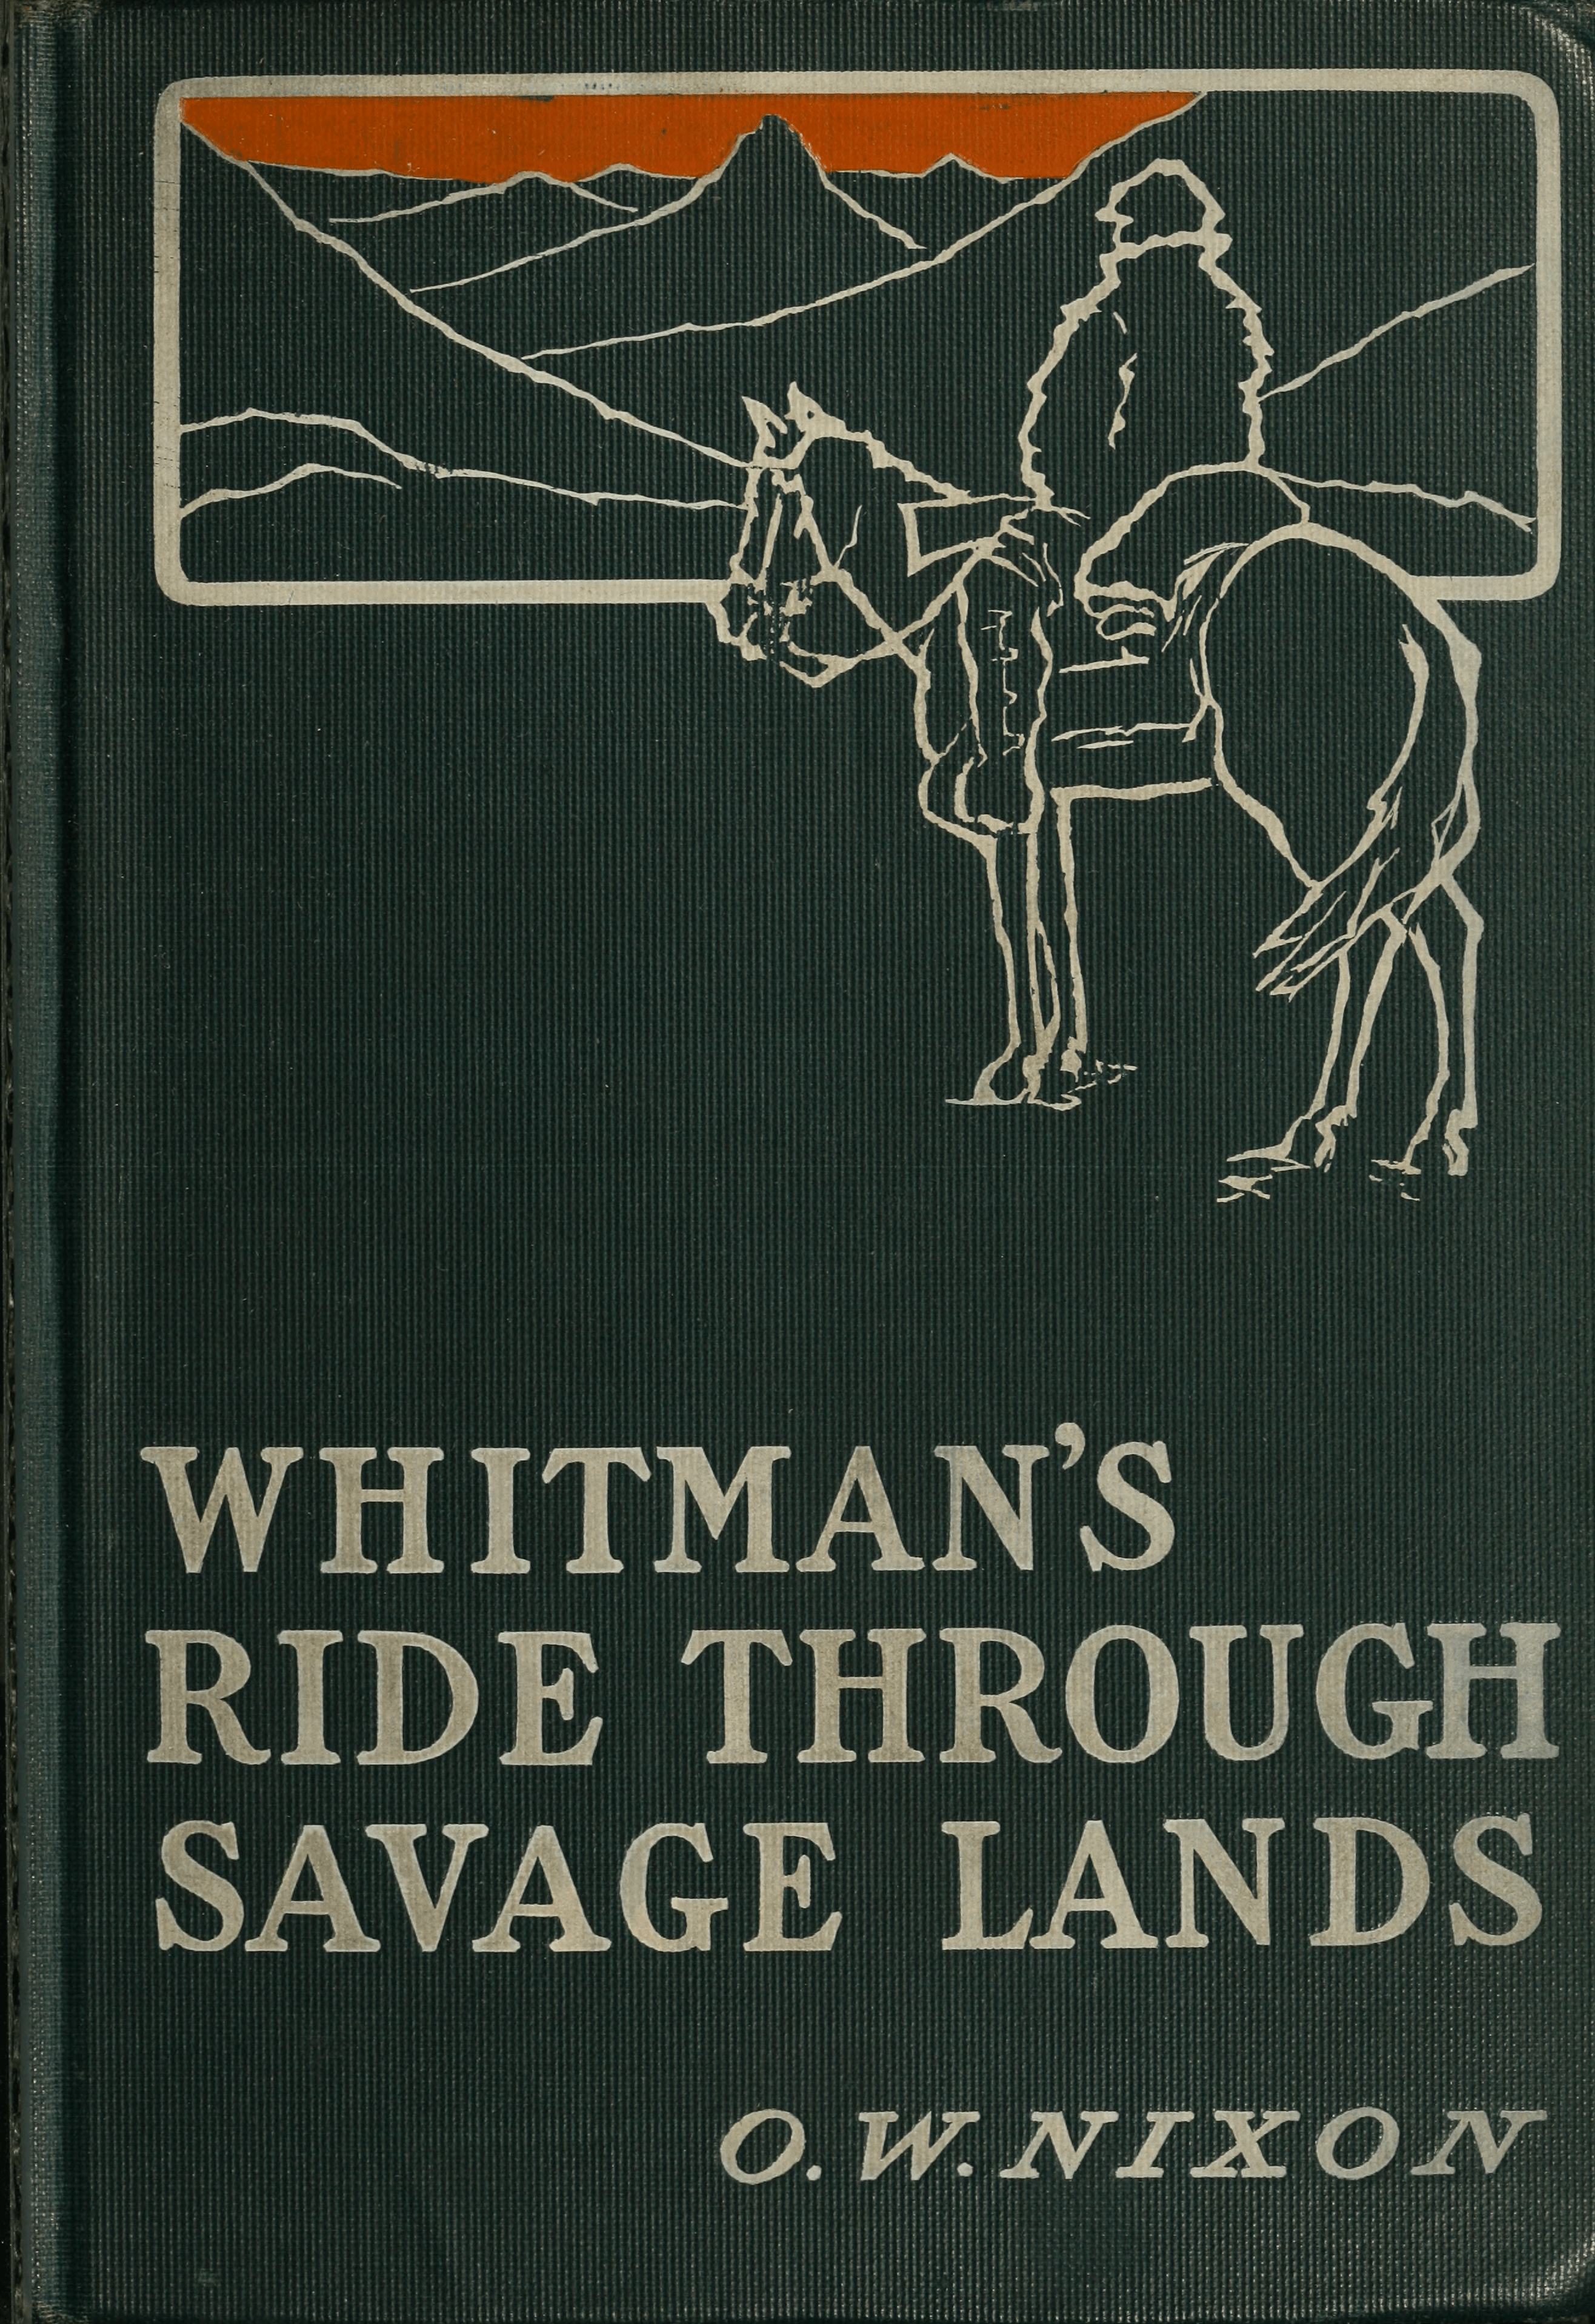 Savage Lands Logo - File:Whitman's Ride through Savage Lands cover.png - Wikimedia Commons